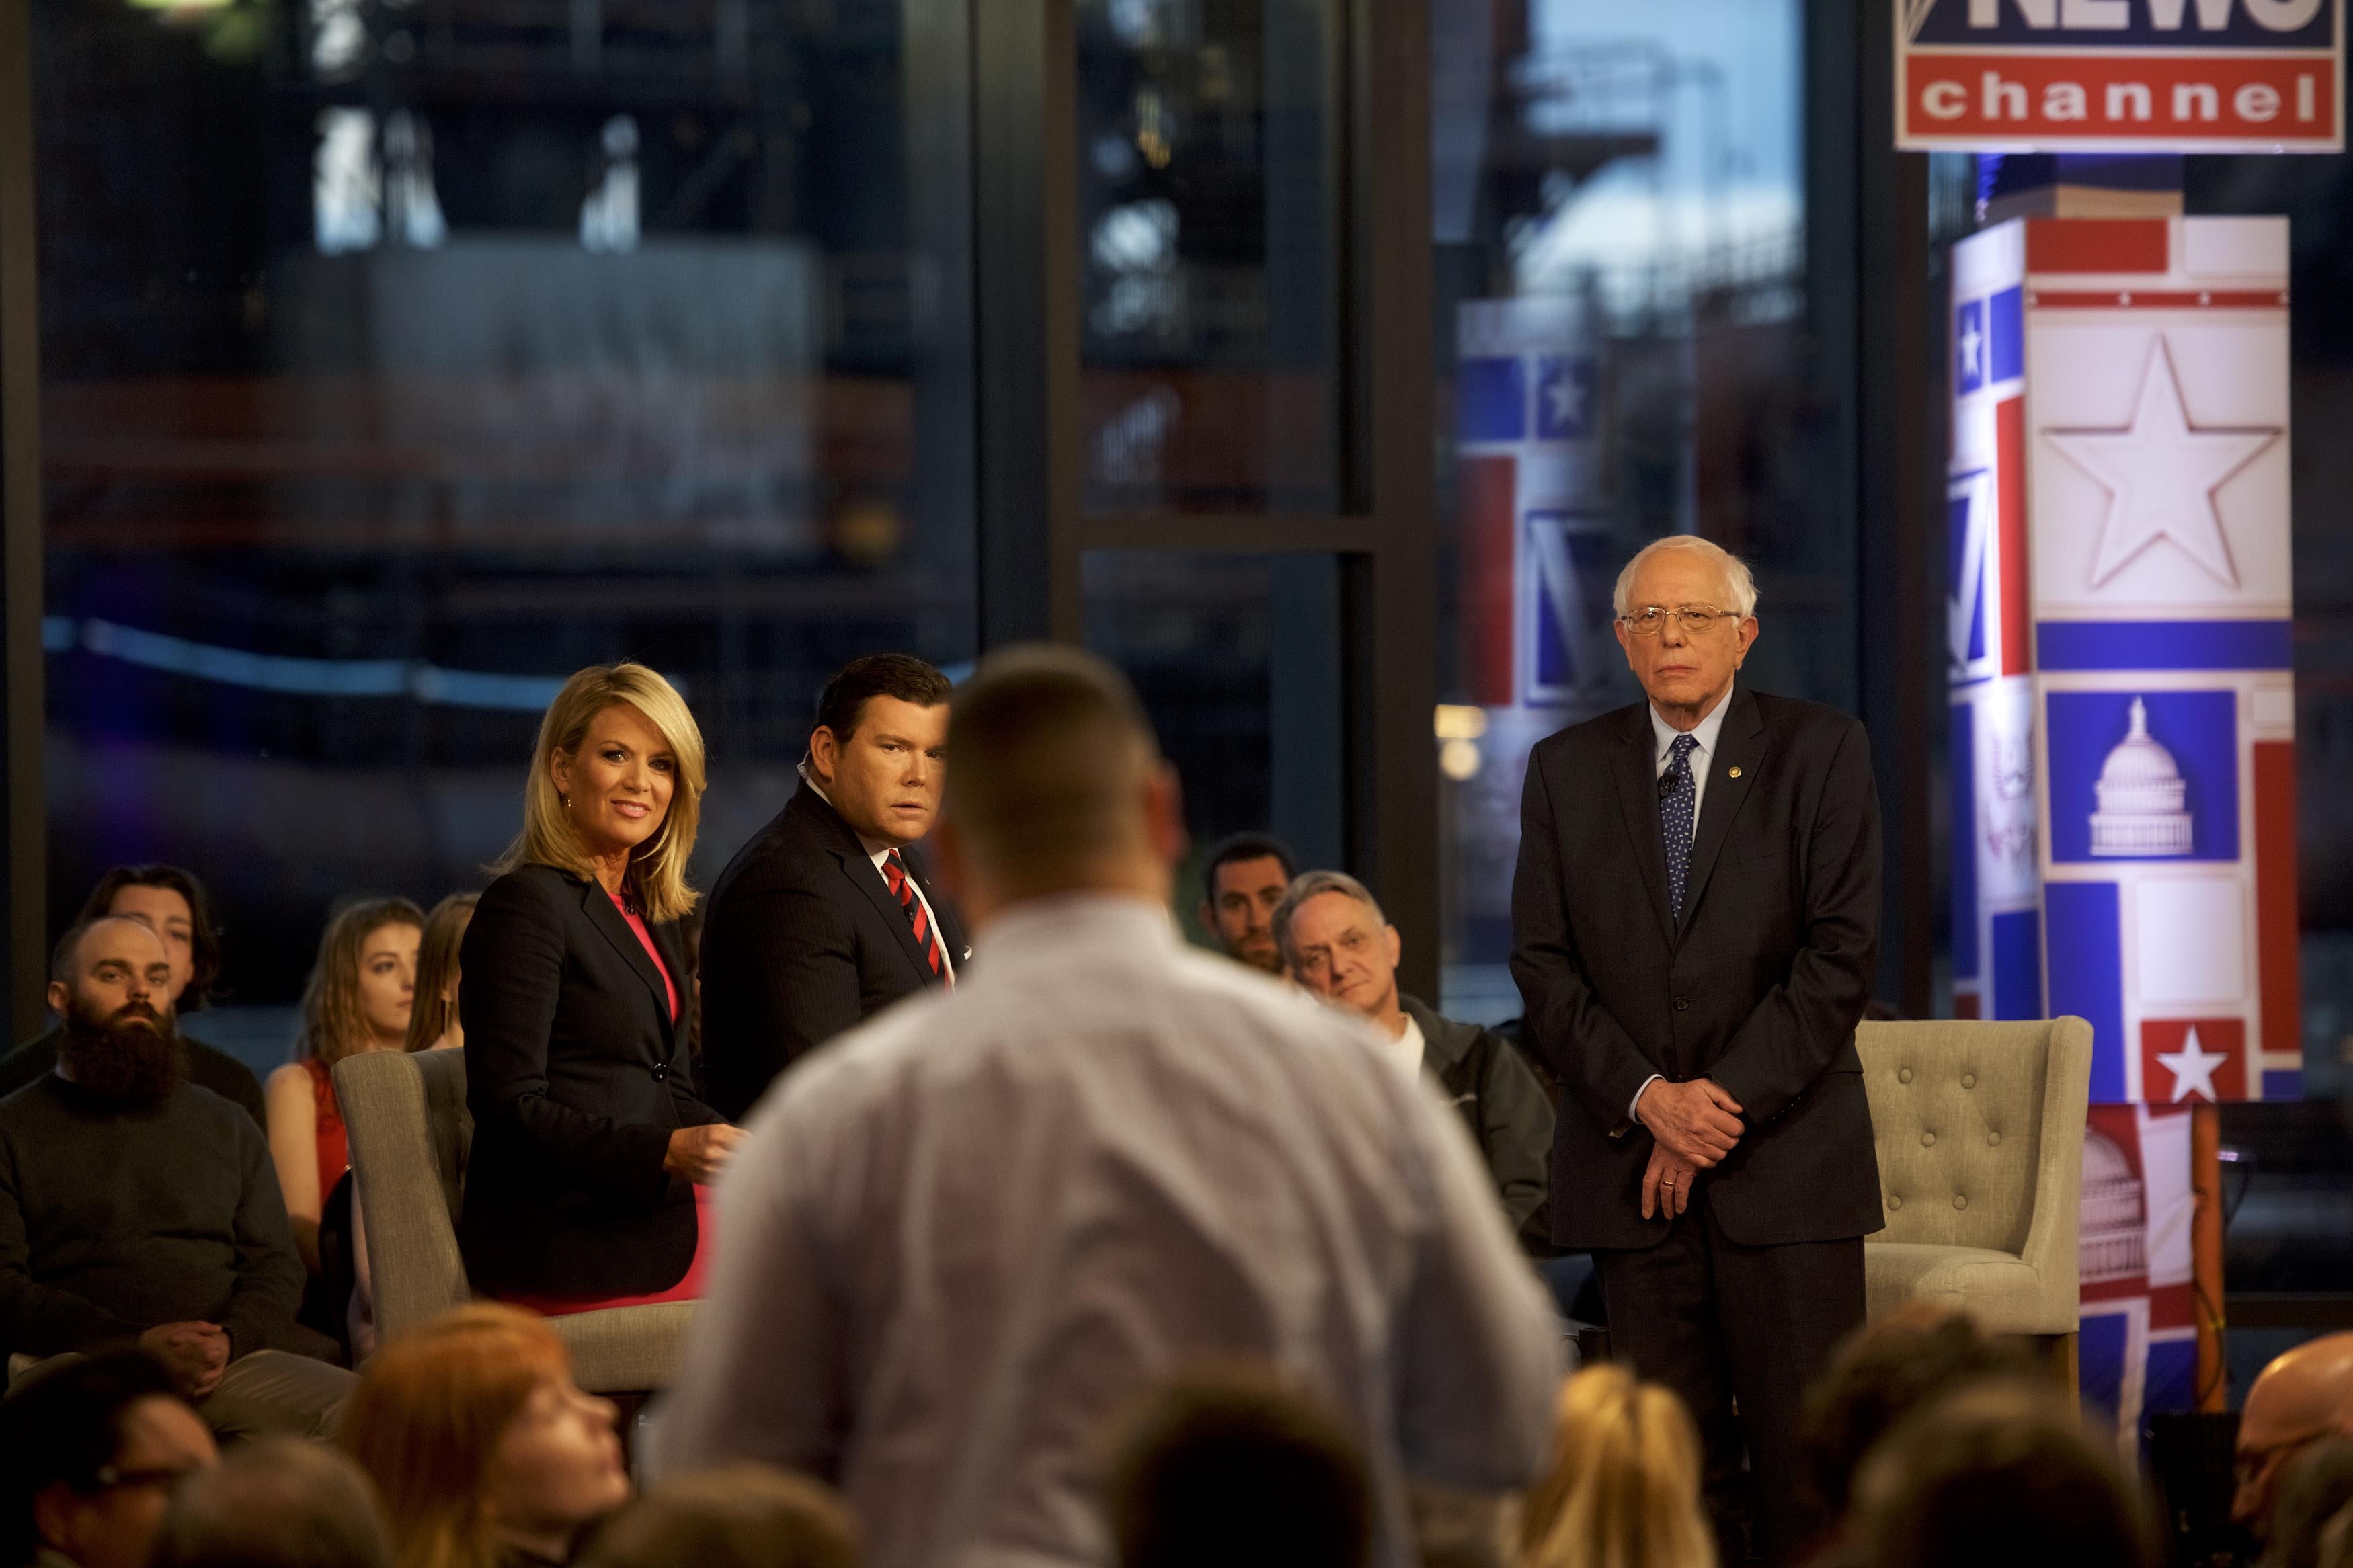 Bernie Sanders fields a question from the audience during a Fox News town hall in Bethlehem, Pennsylvania on April 15, 2019.